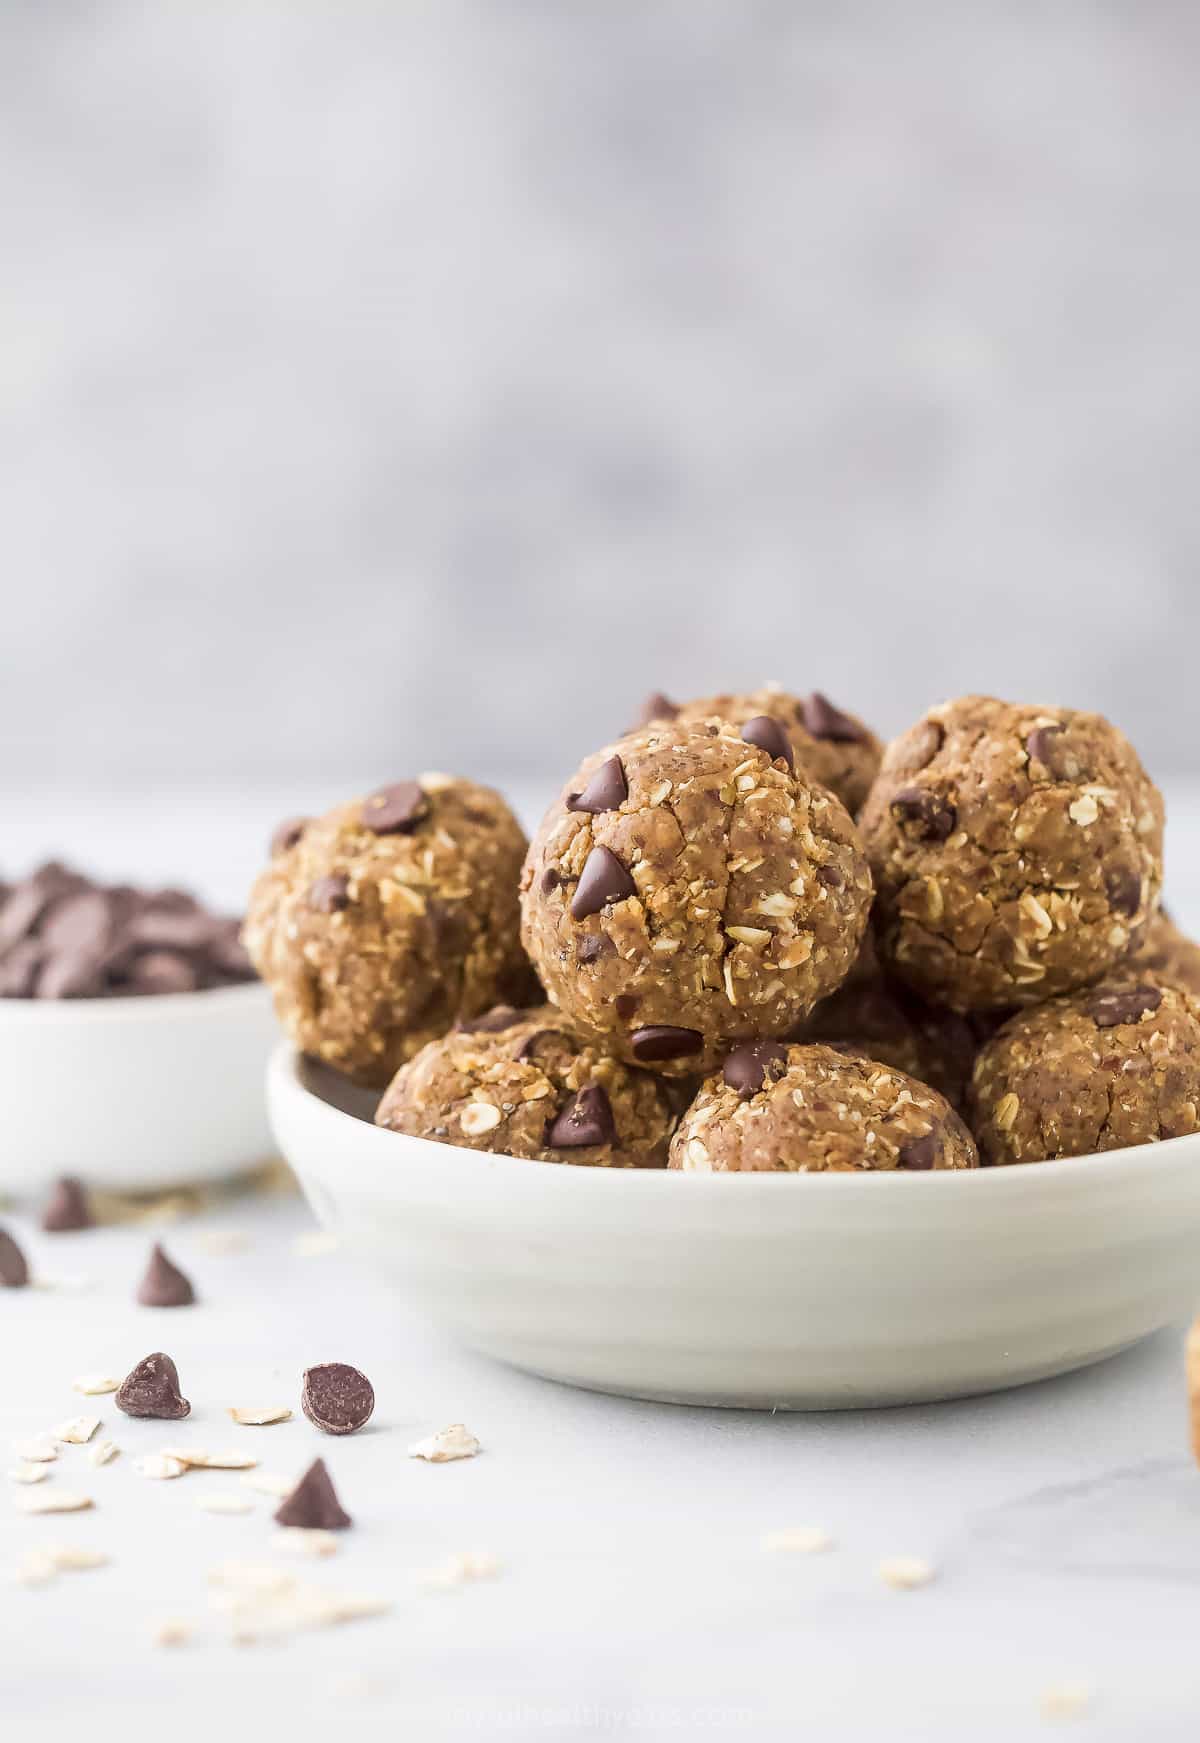 A bowl of peanut butter protein balls on a countertop beside a dish of mini chocolate chips